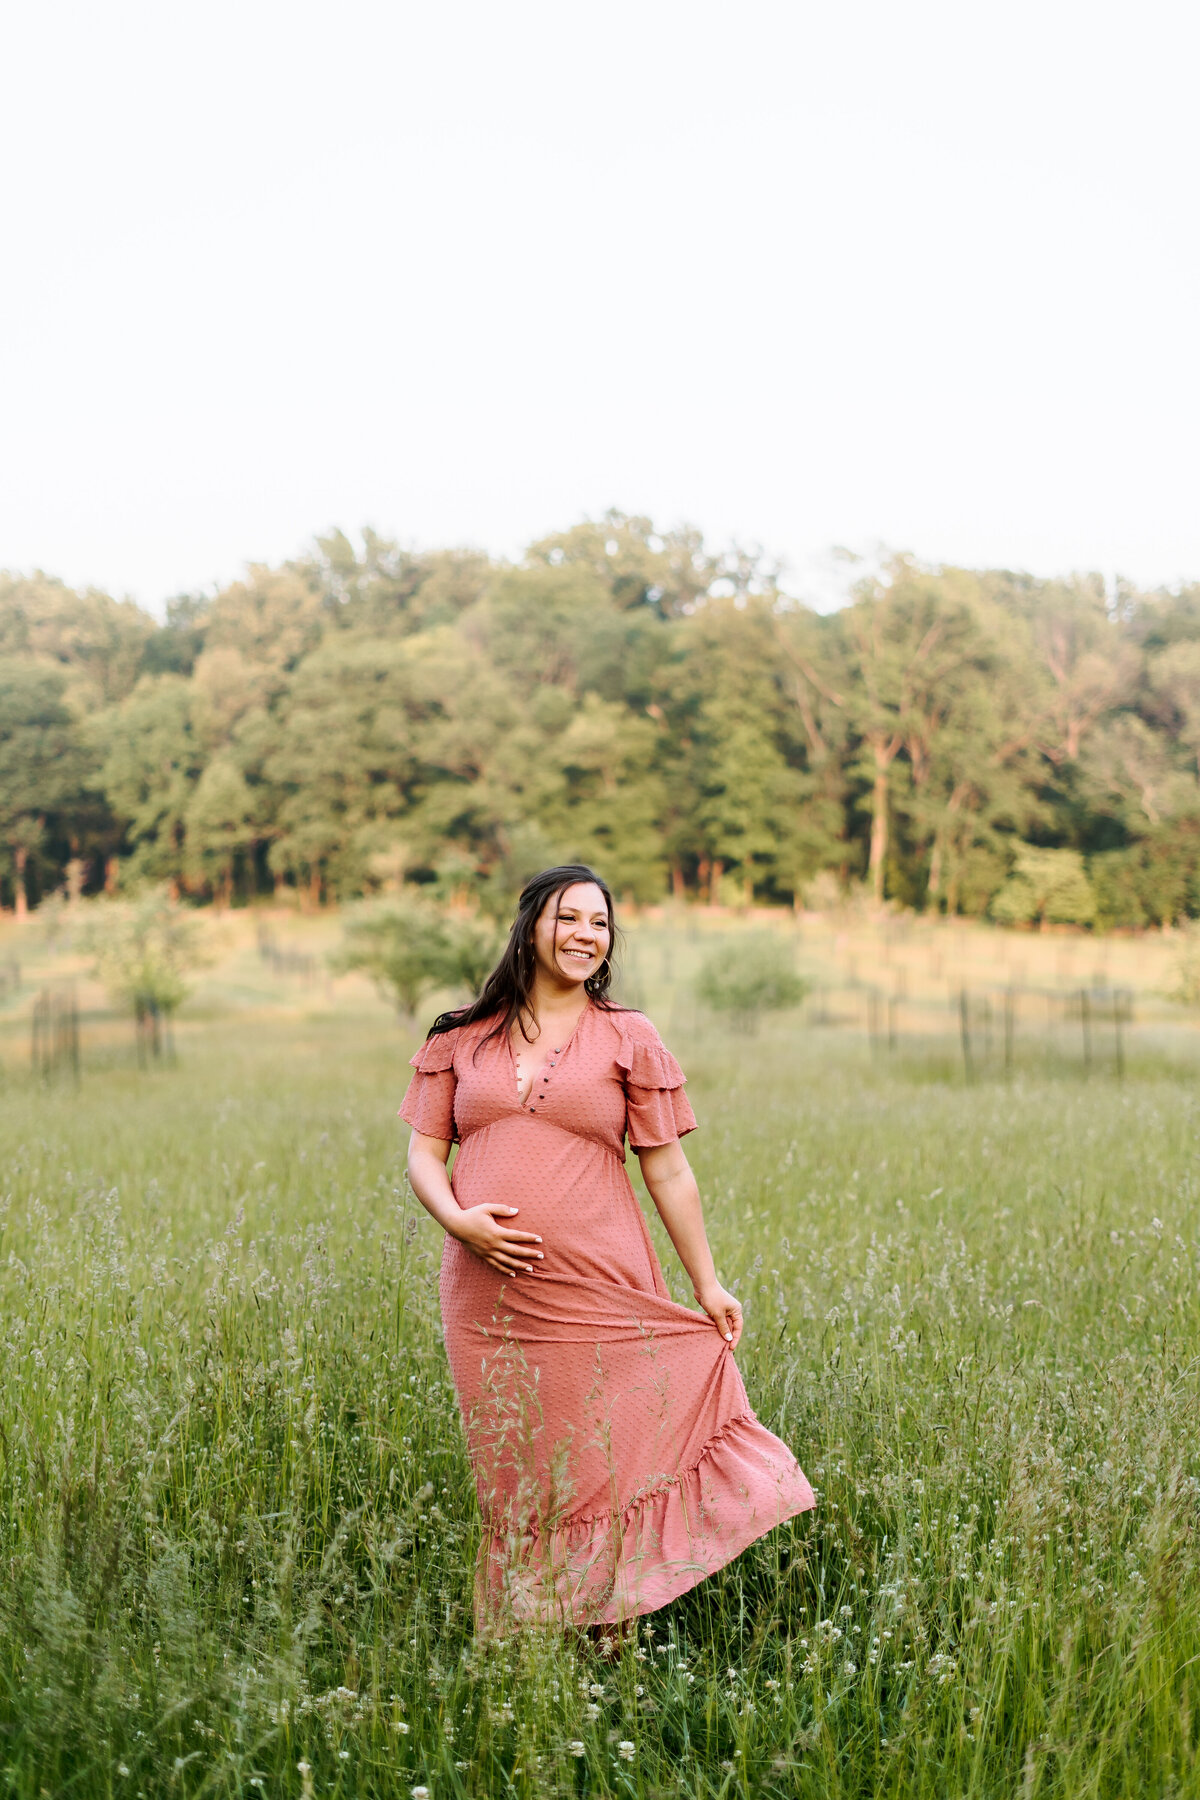 HQ-FINAL_Alex+Connor Maternity-2023_Brenna Marie Photography-98